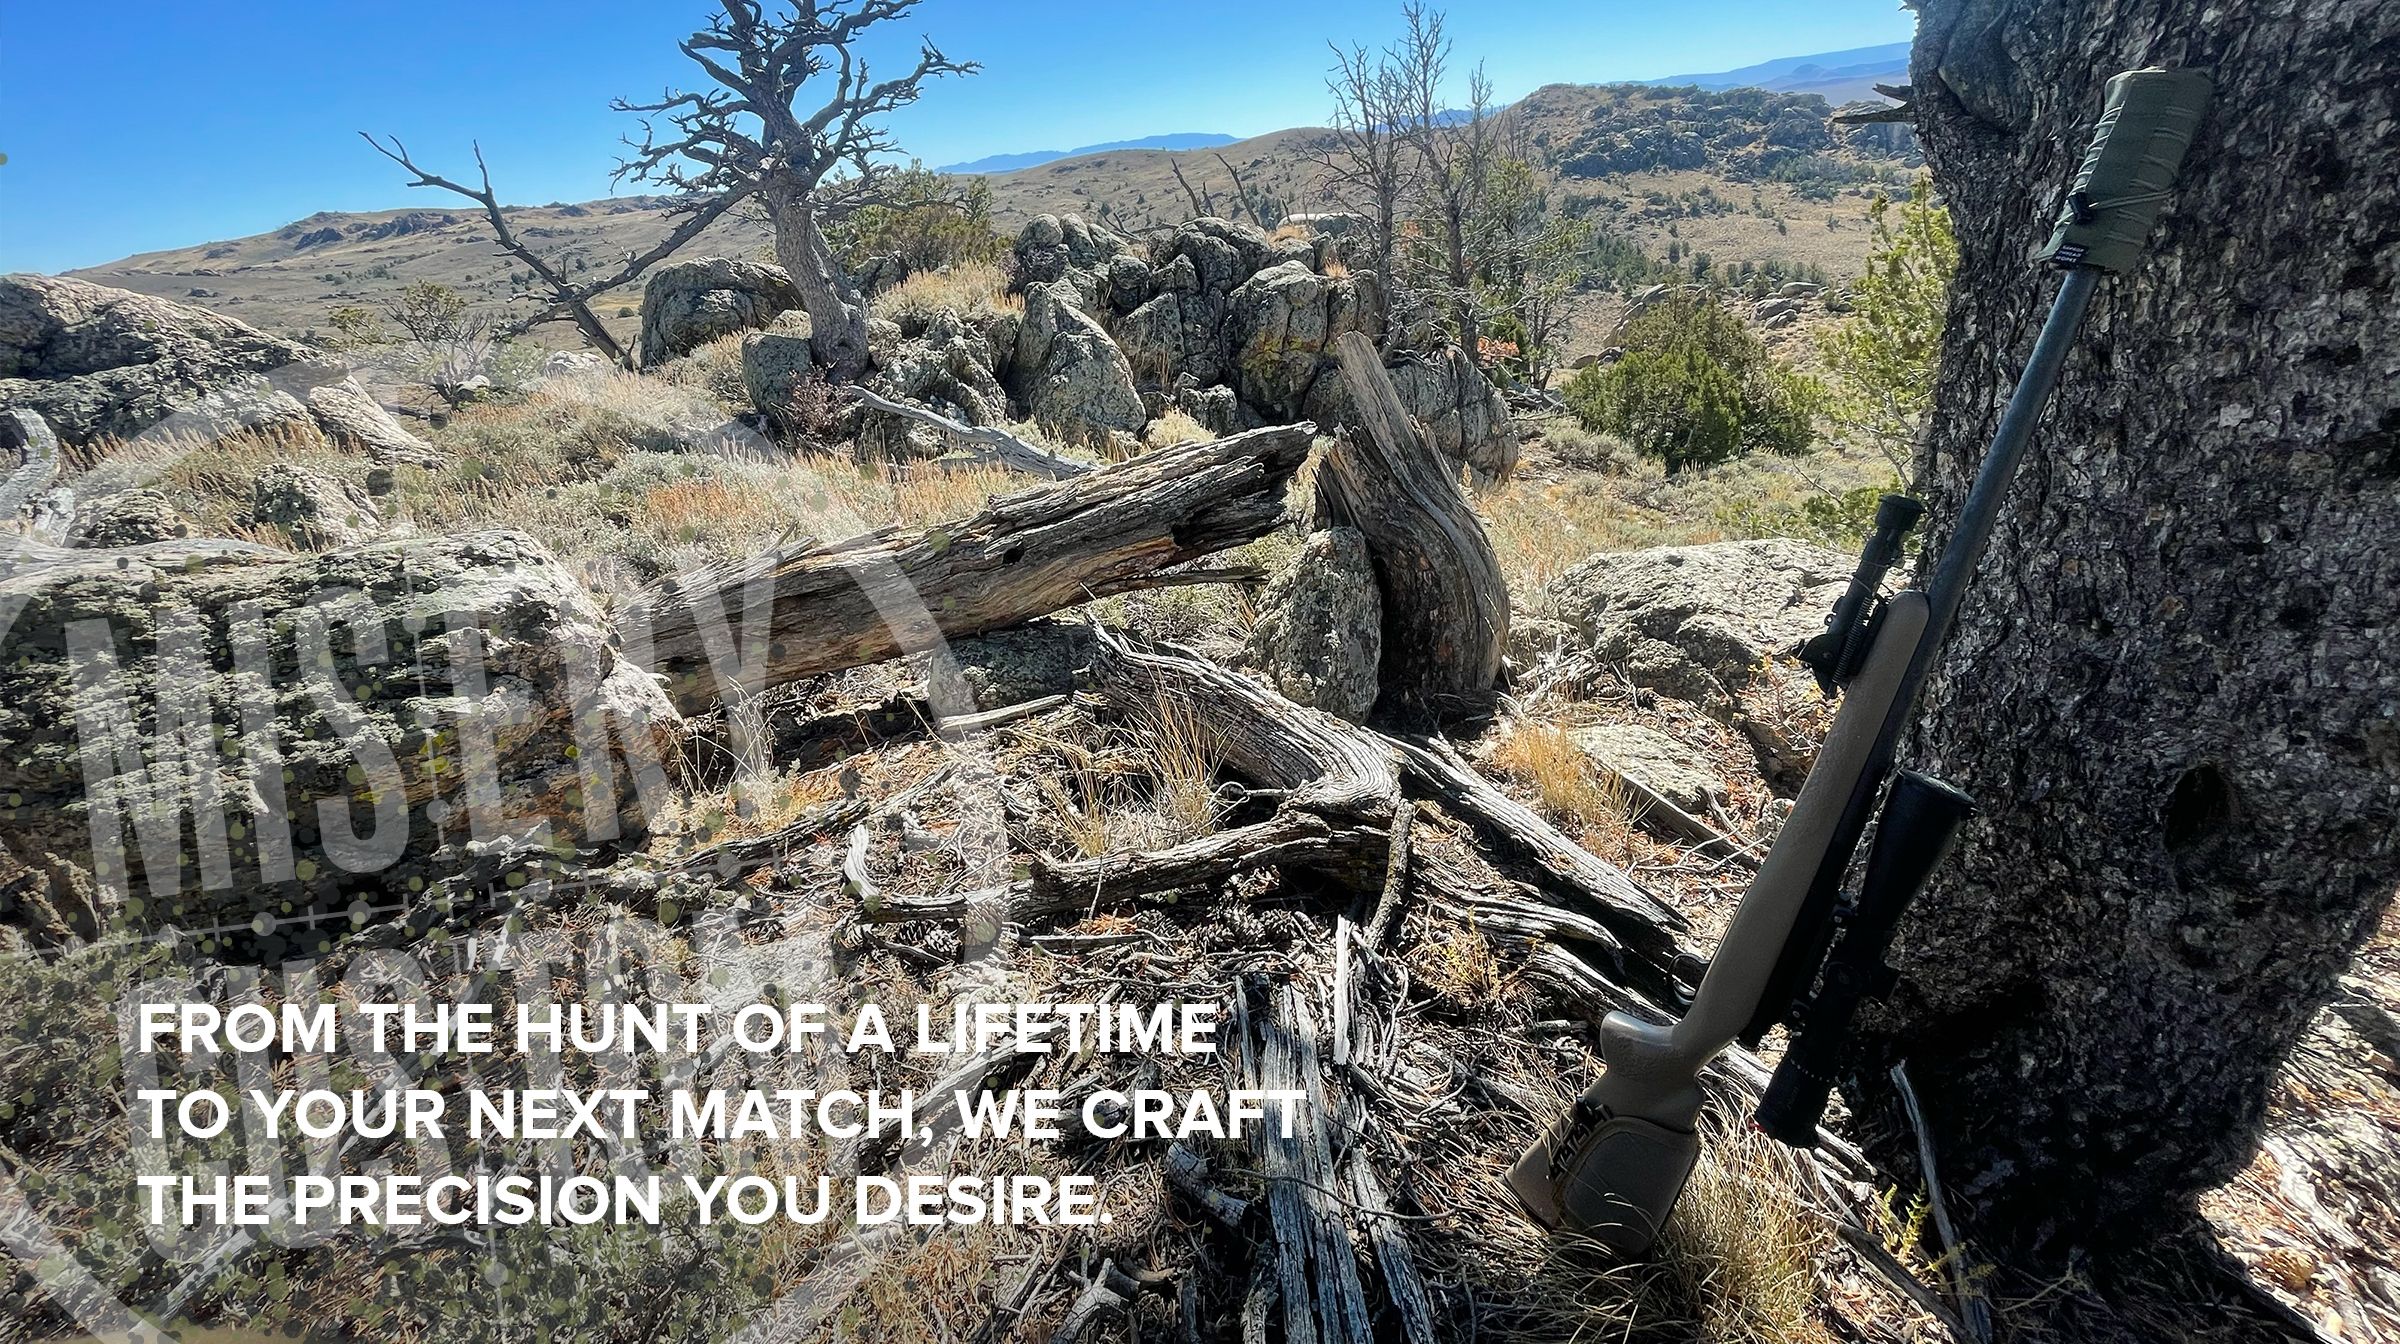 From the hunt of a life time to your next match, we craft the precision you desire.